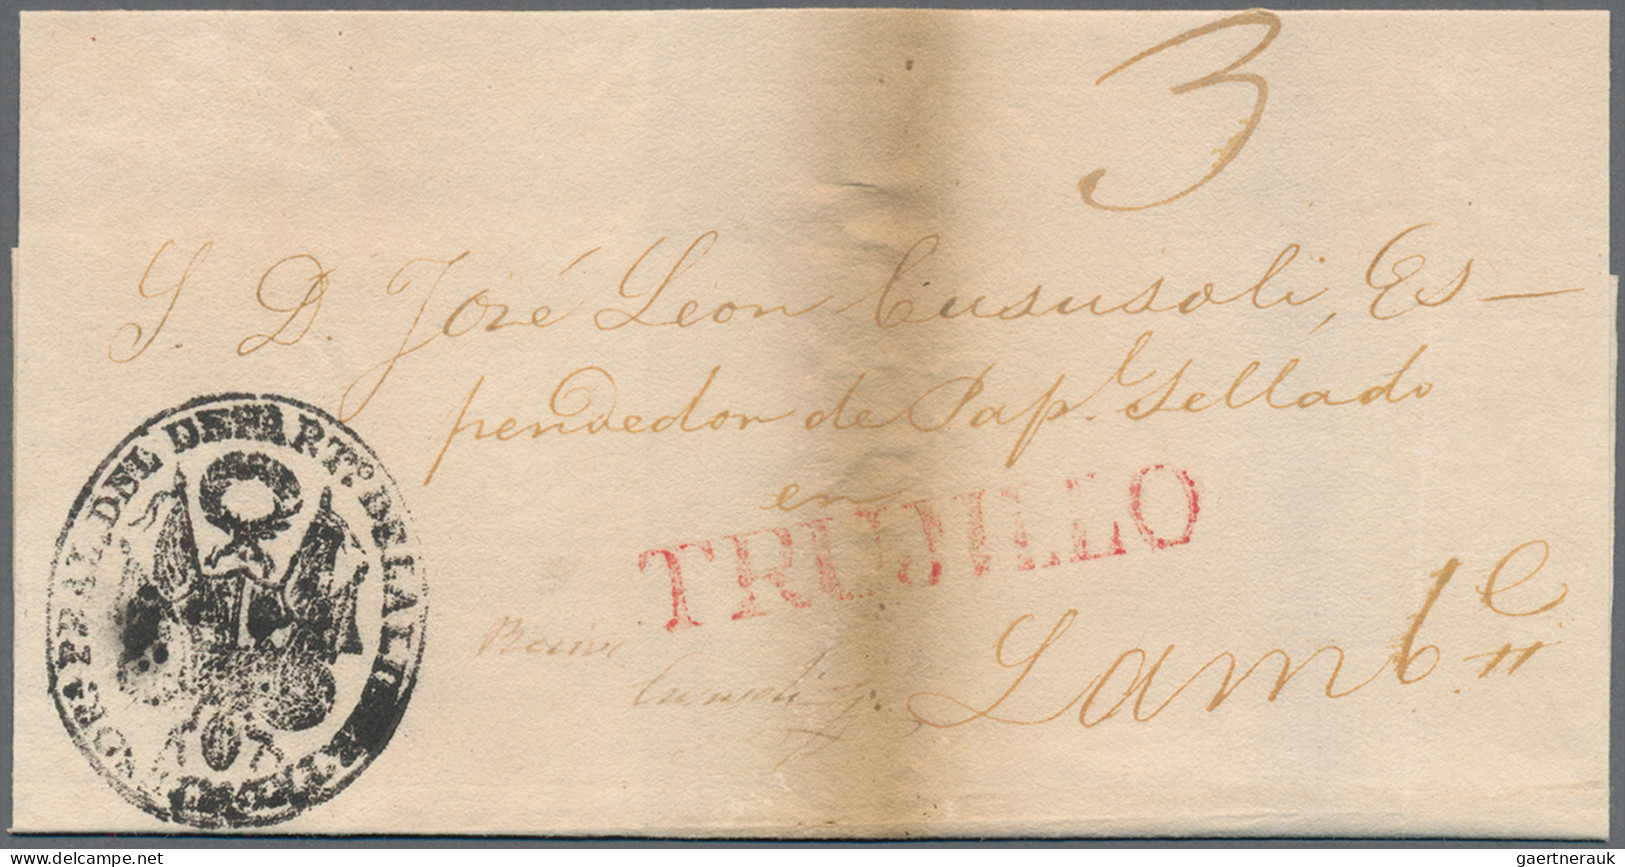 Peru - Pre Adhesives  / Stampless Covers: 1823/30, four folded envelopes with ve